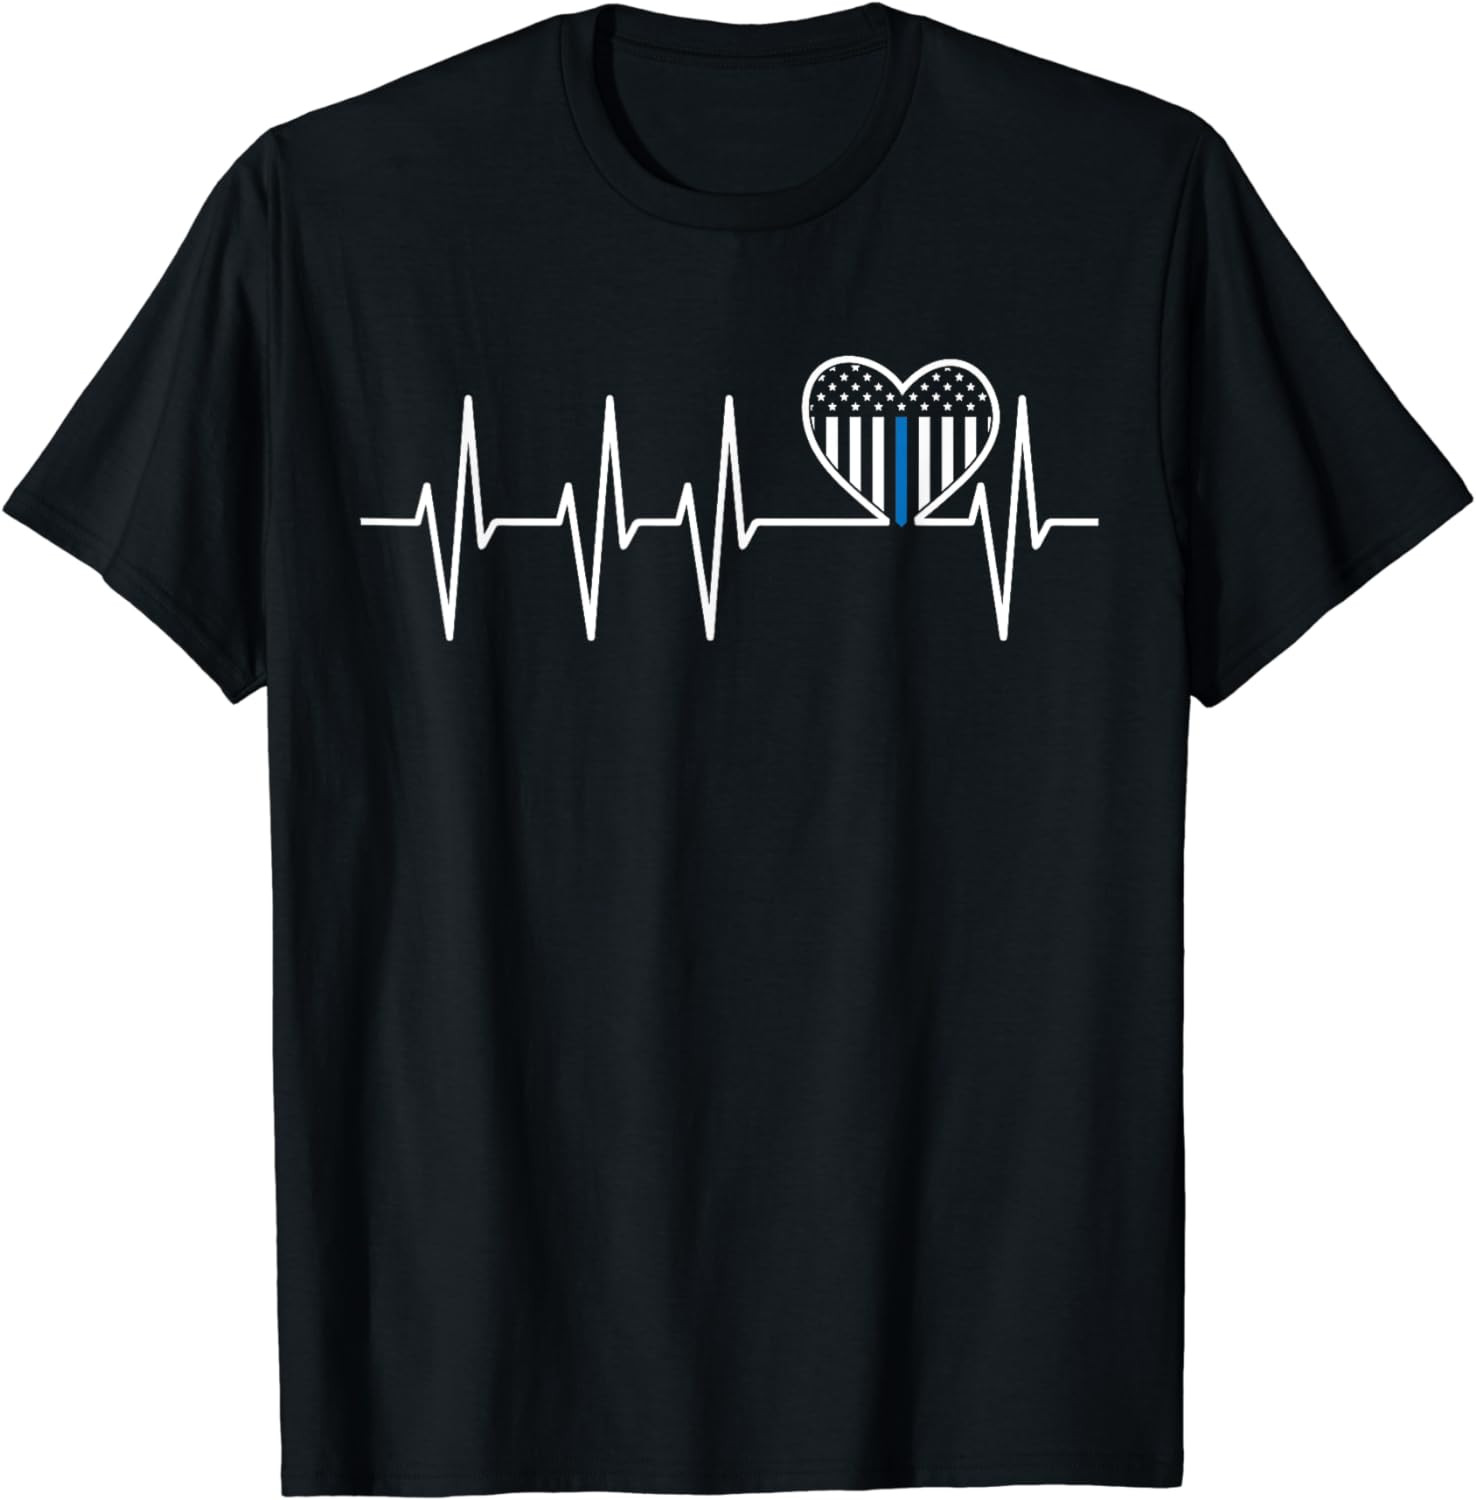 Thin Blue Line Heartbeat Heart Flag Pro Police Officer Pride T-Shirt